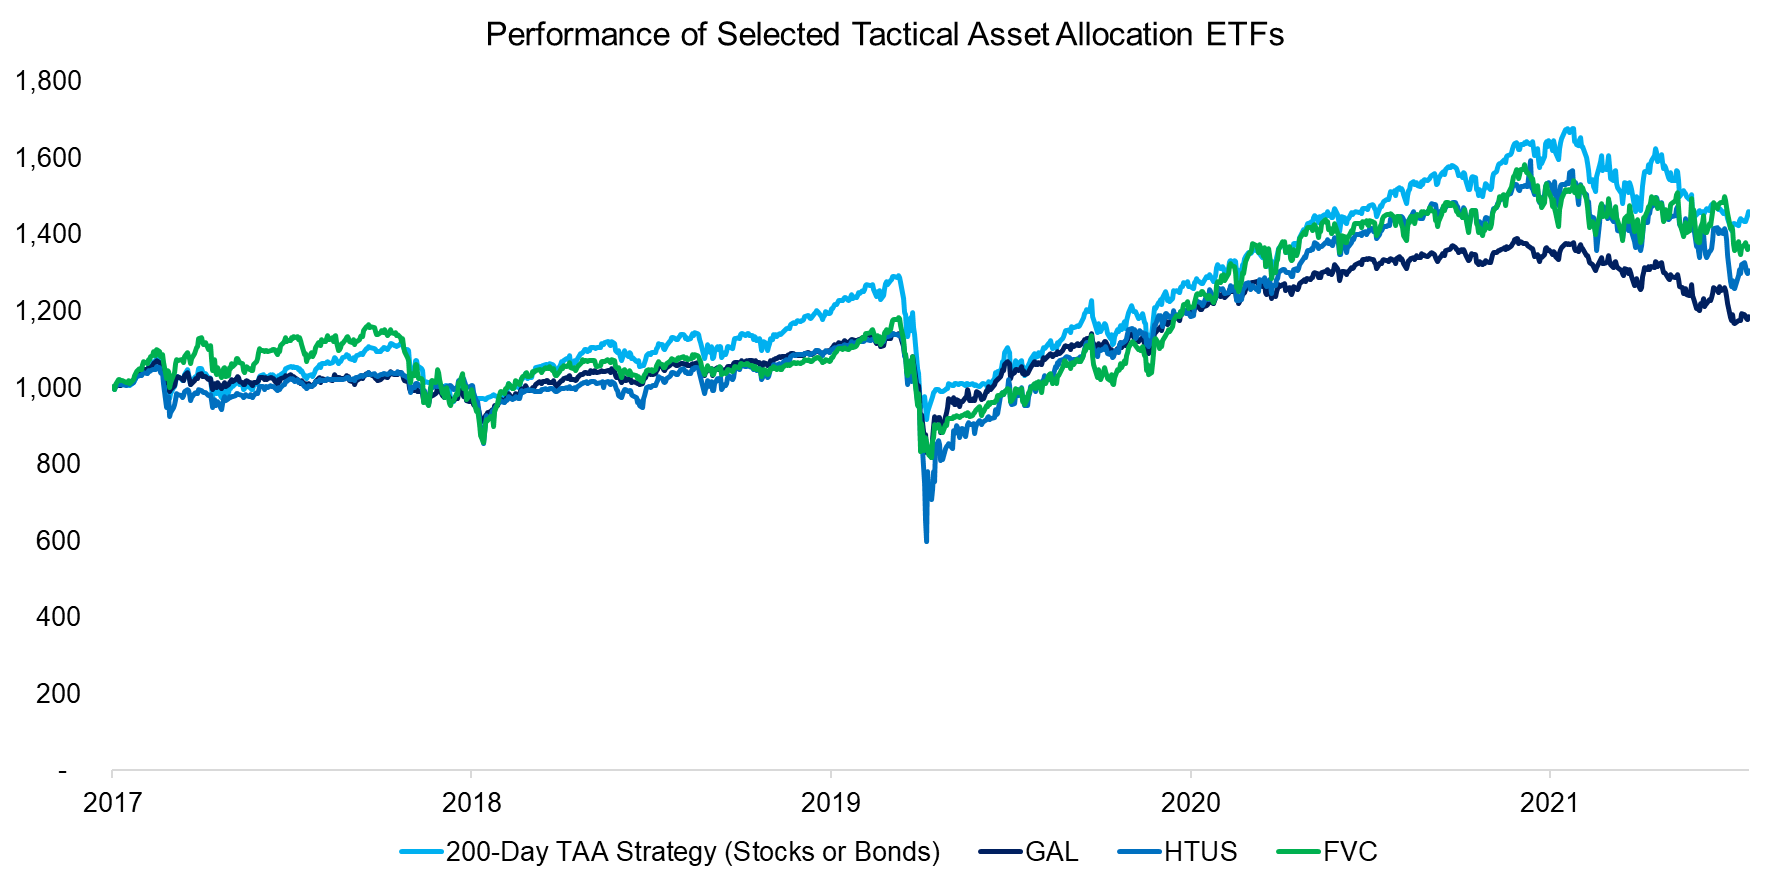 Performance of Selected Tactical Asset Allocation ETFs